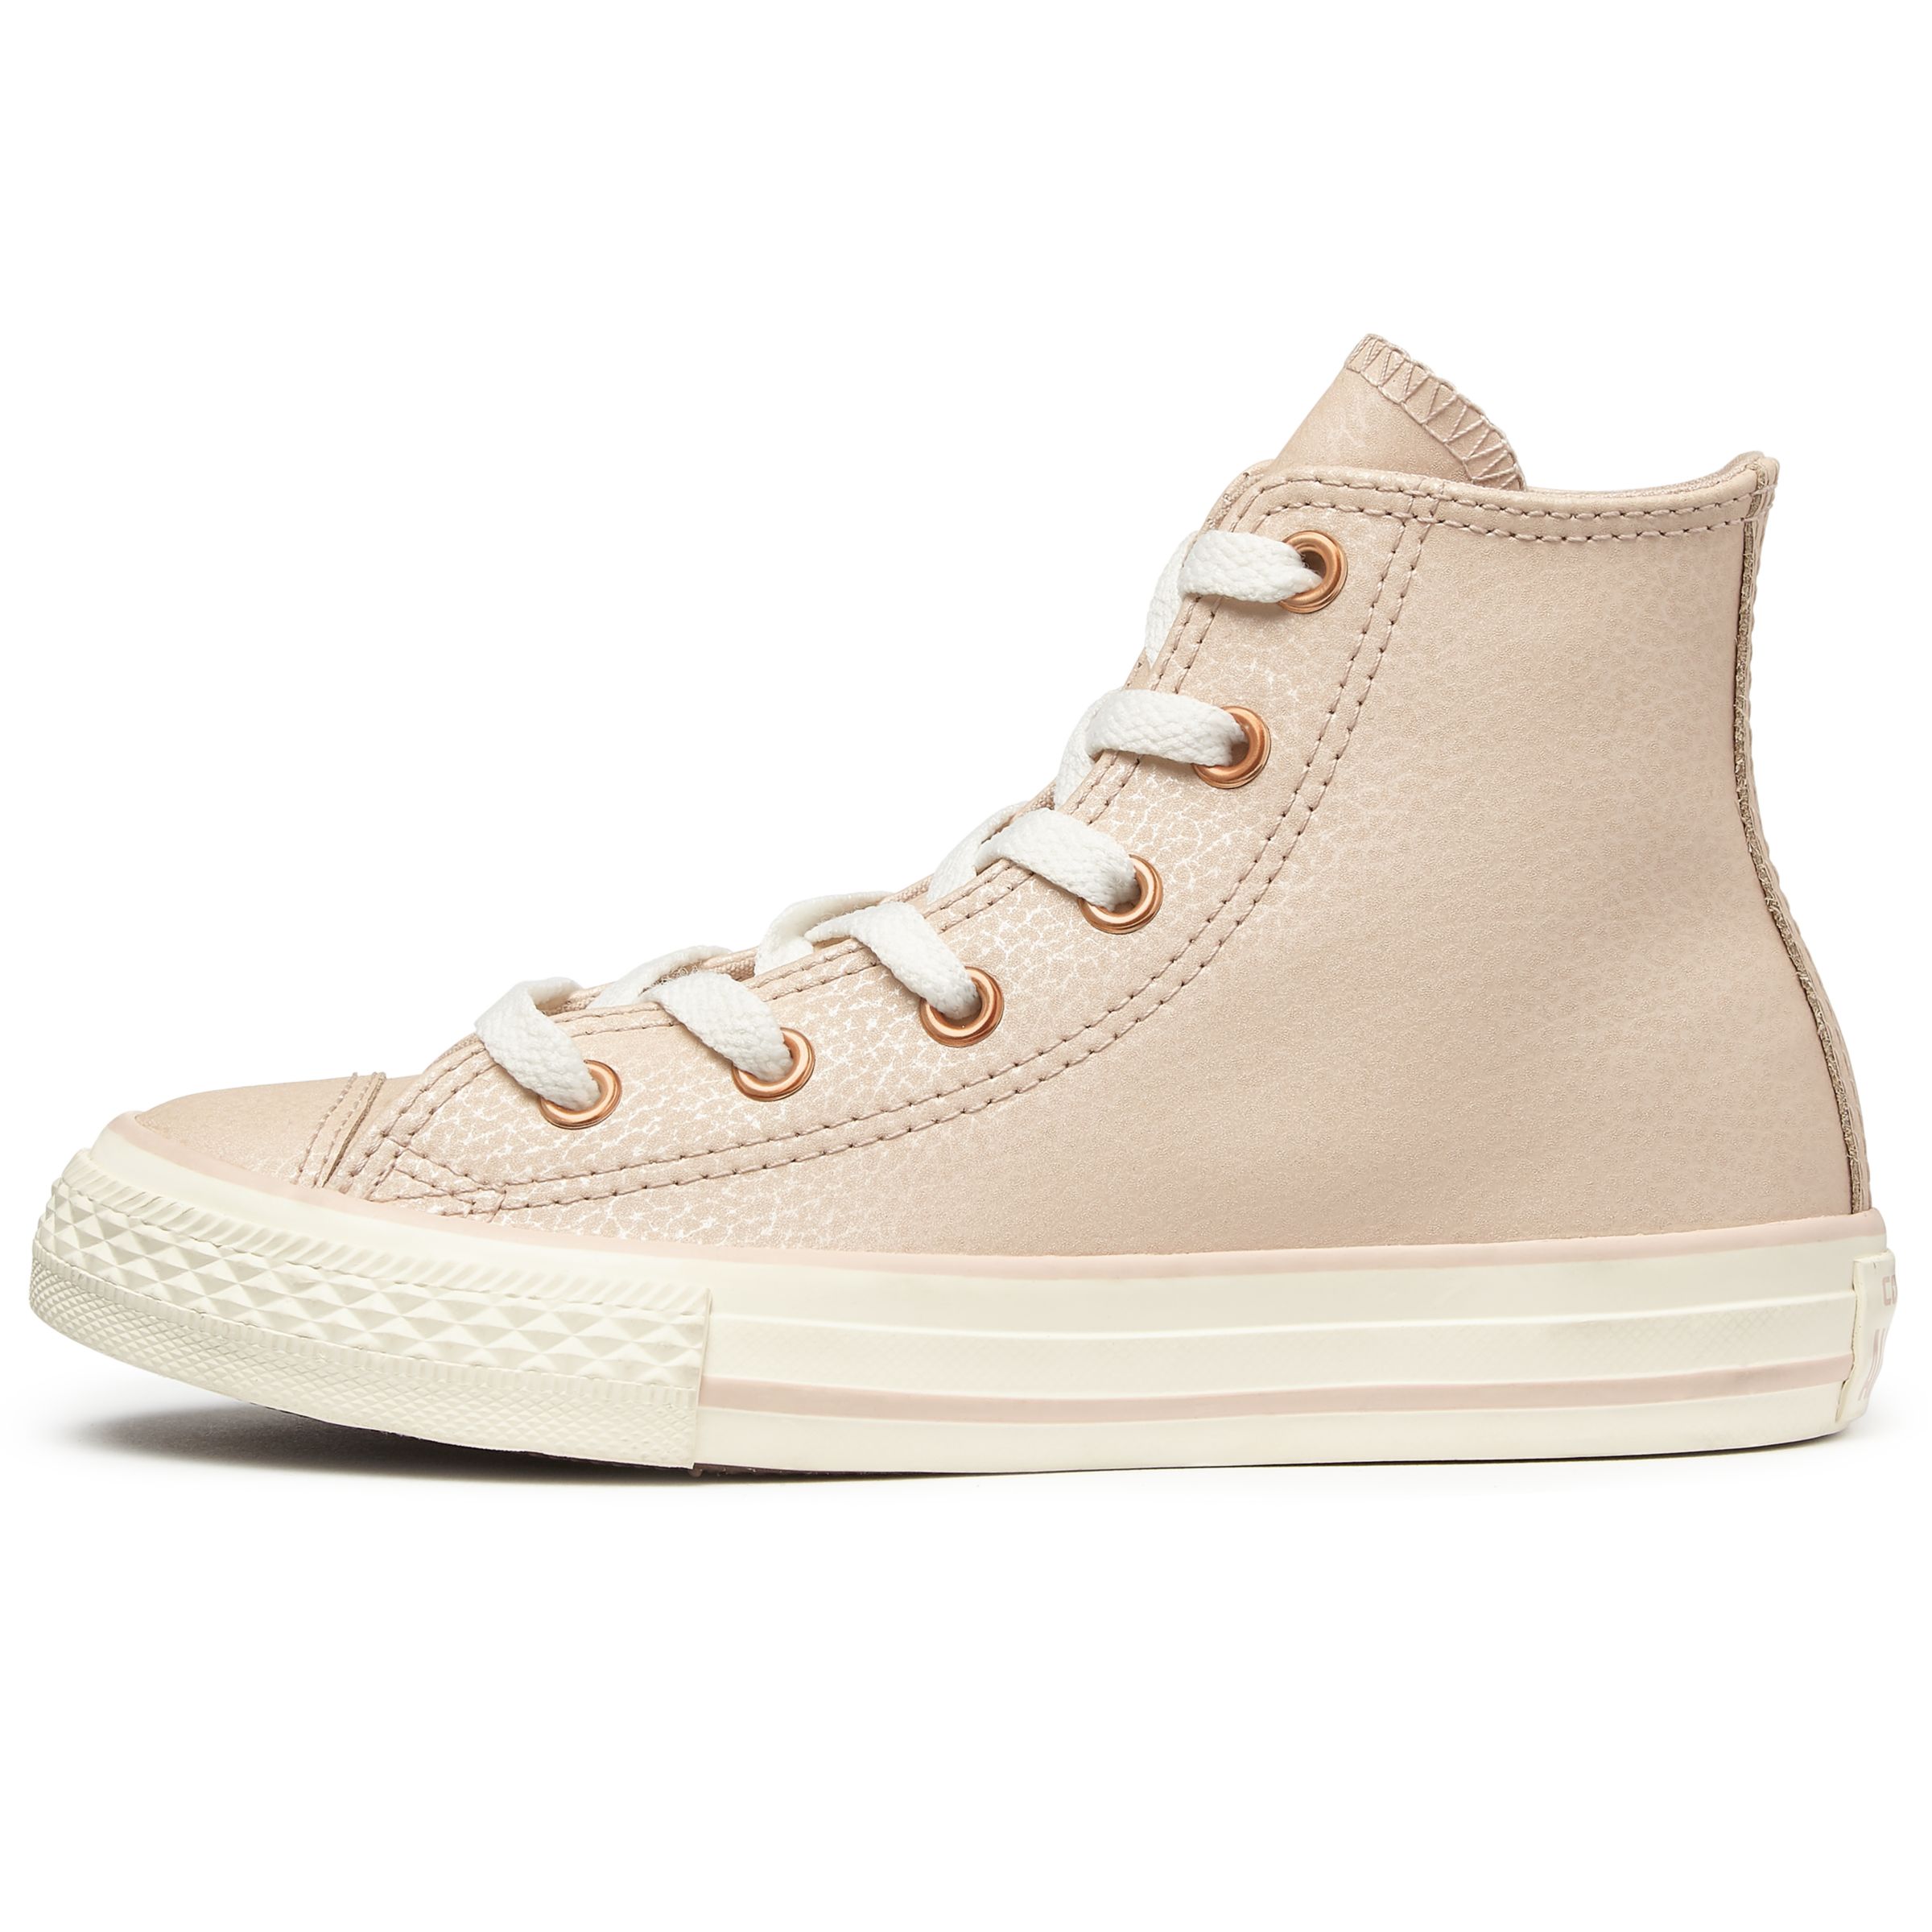 Converse Chuck Taylor All Star Hi-Top Trainers, Pink, 13 Jnr